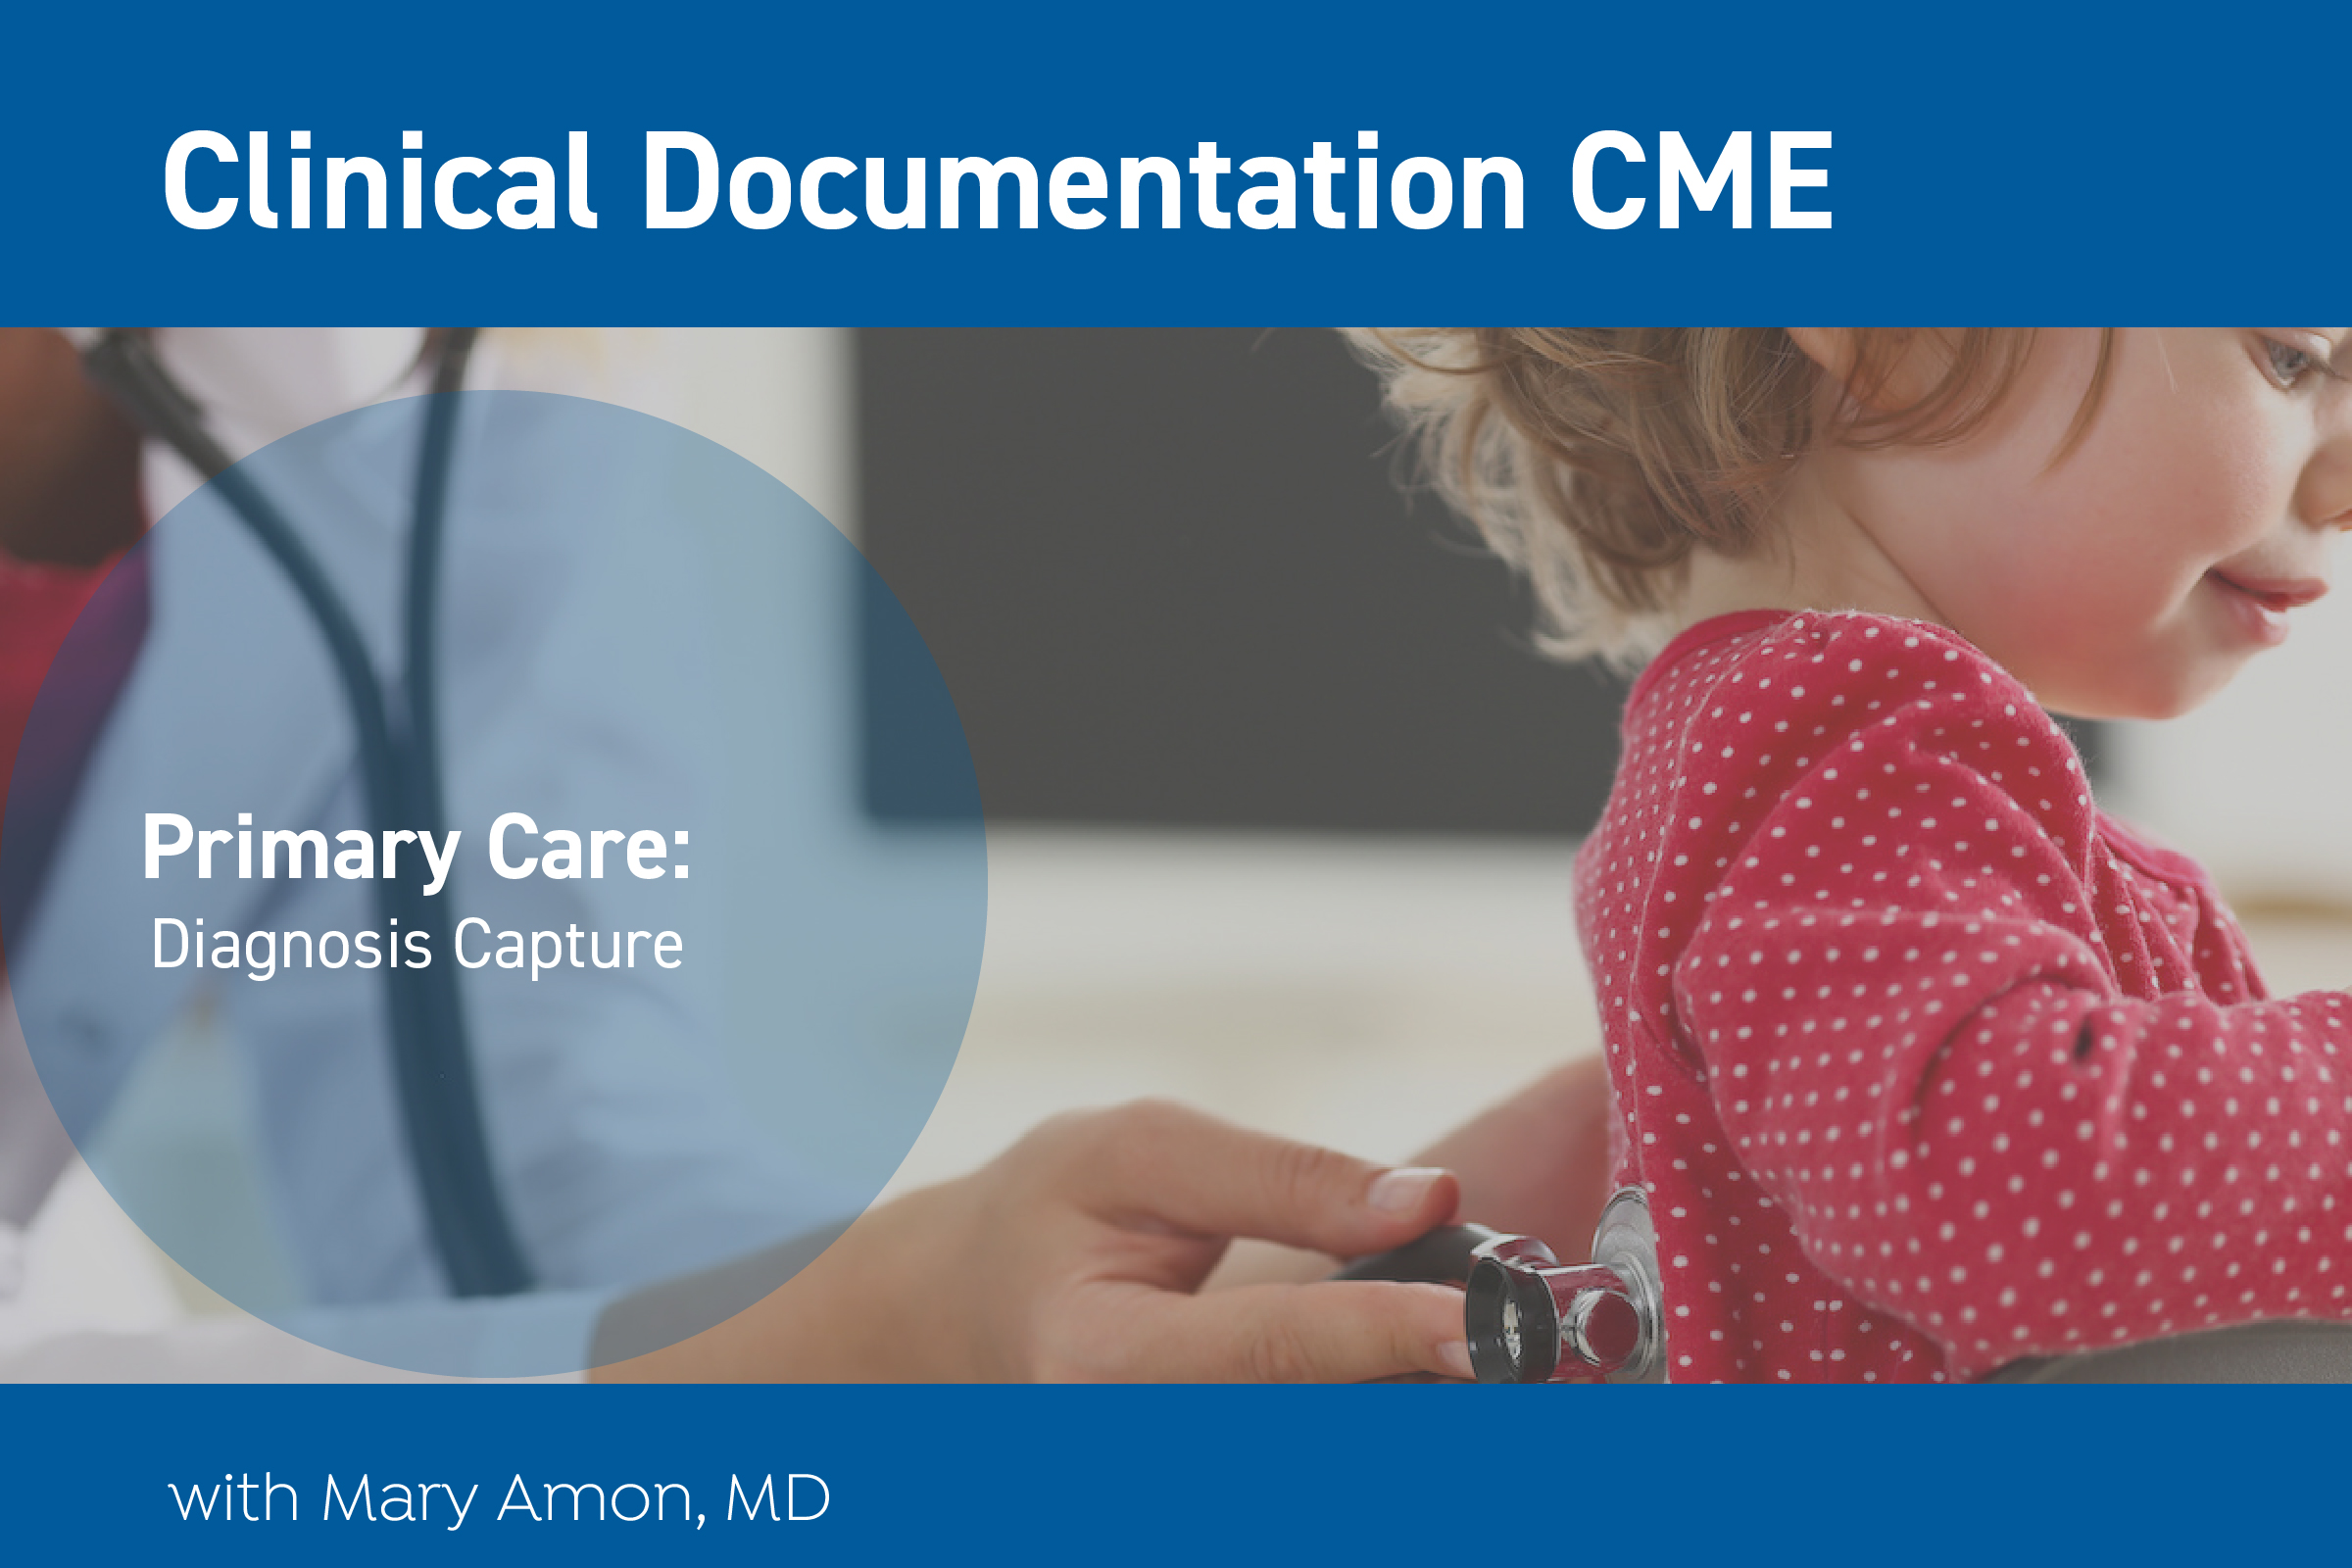 Promotion for Primary Care Diagnosis Capture CME